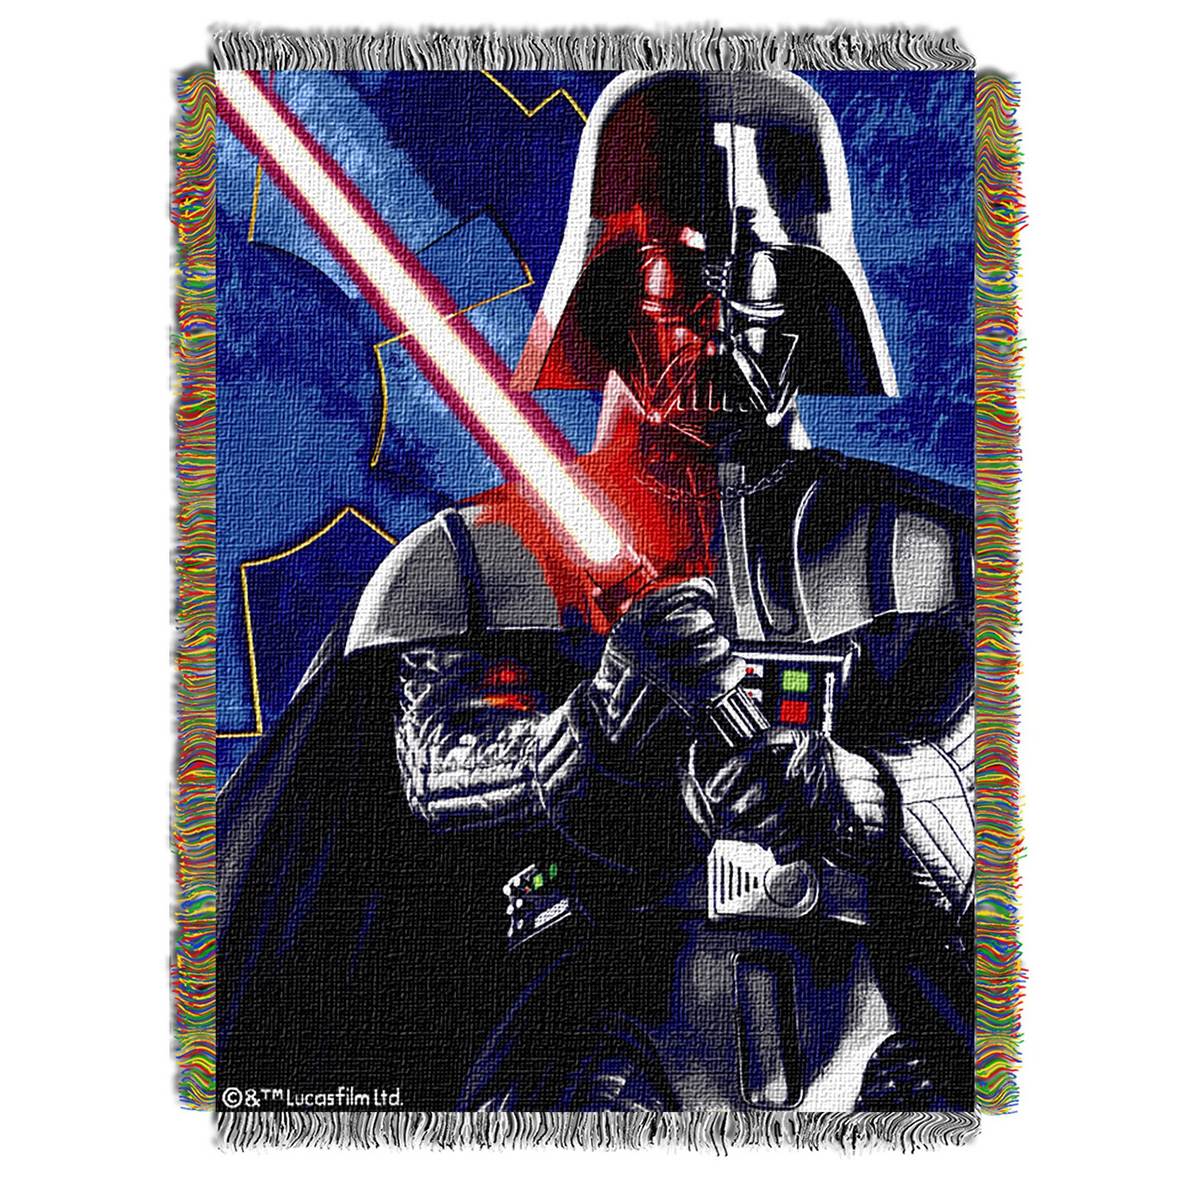 Northwest Star Wars(R) Sith Lord Woven Tapestry Throw